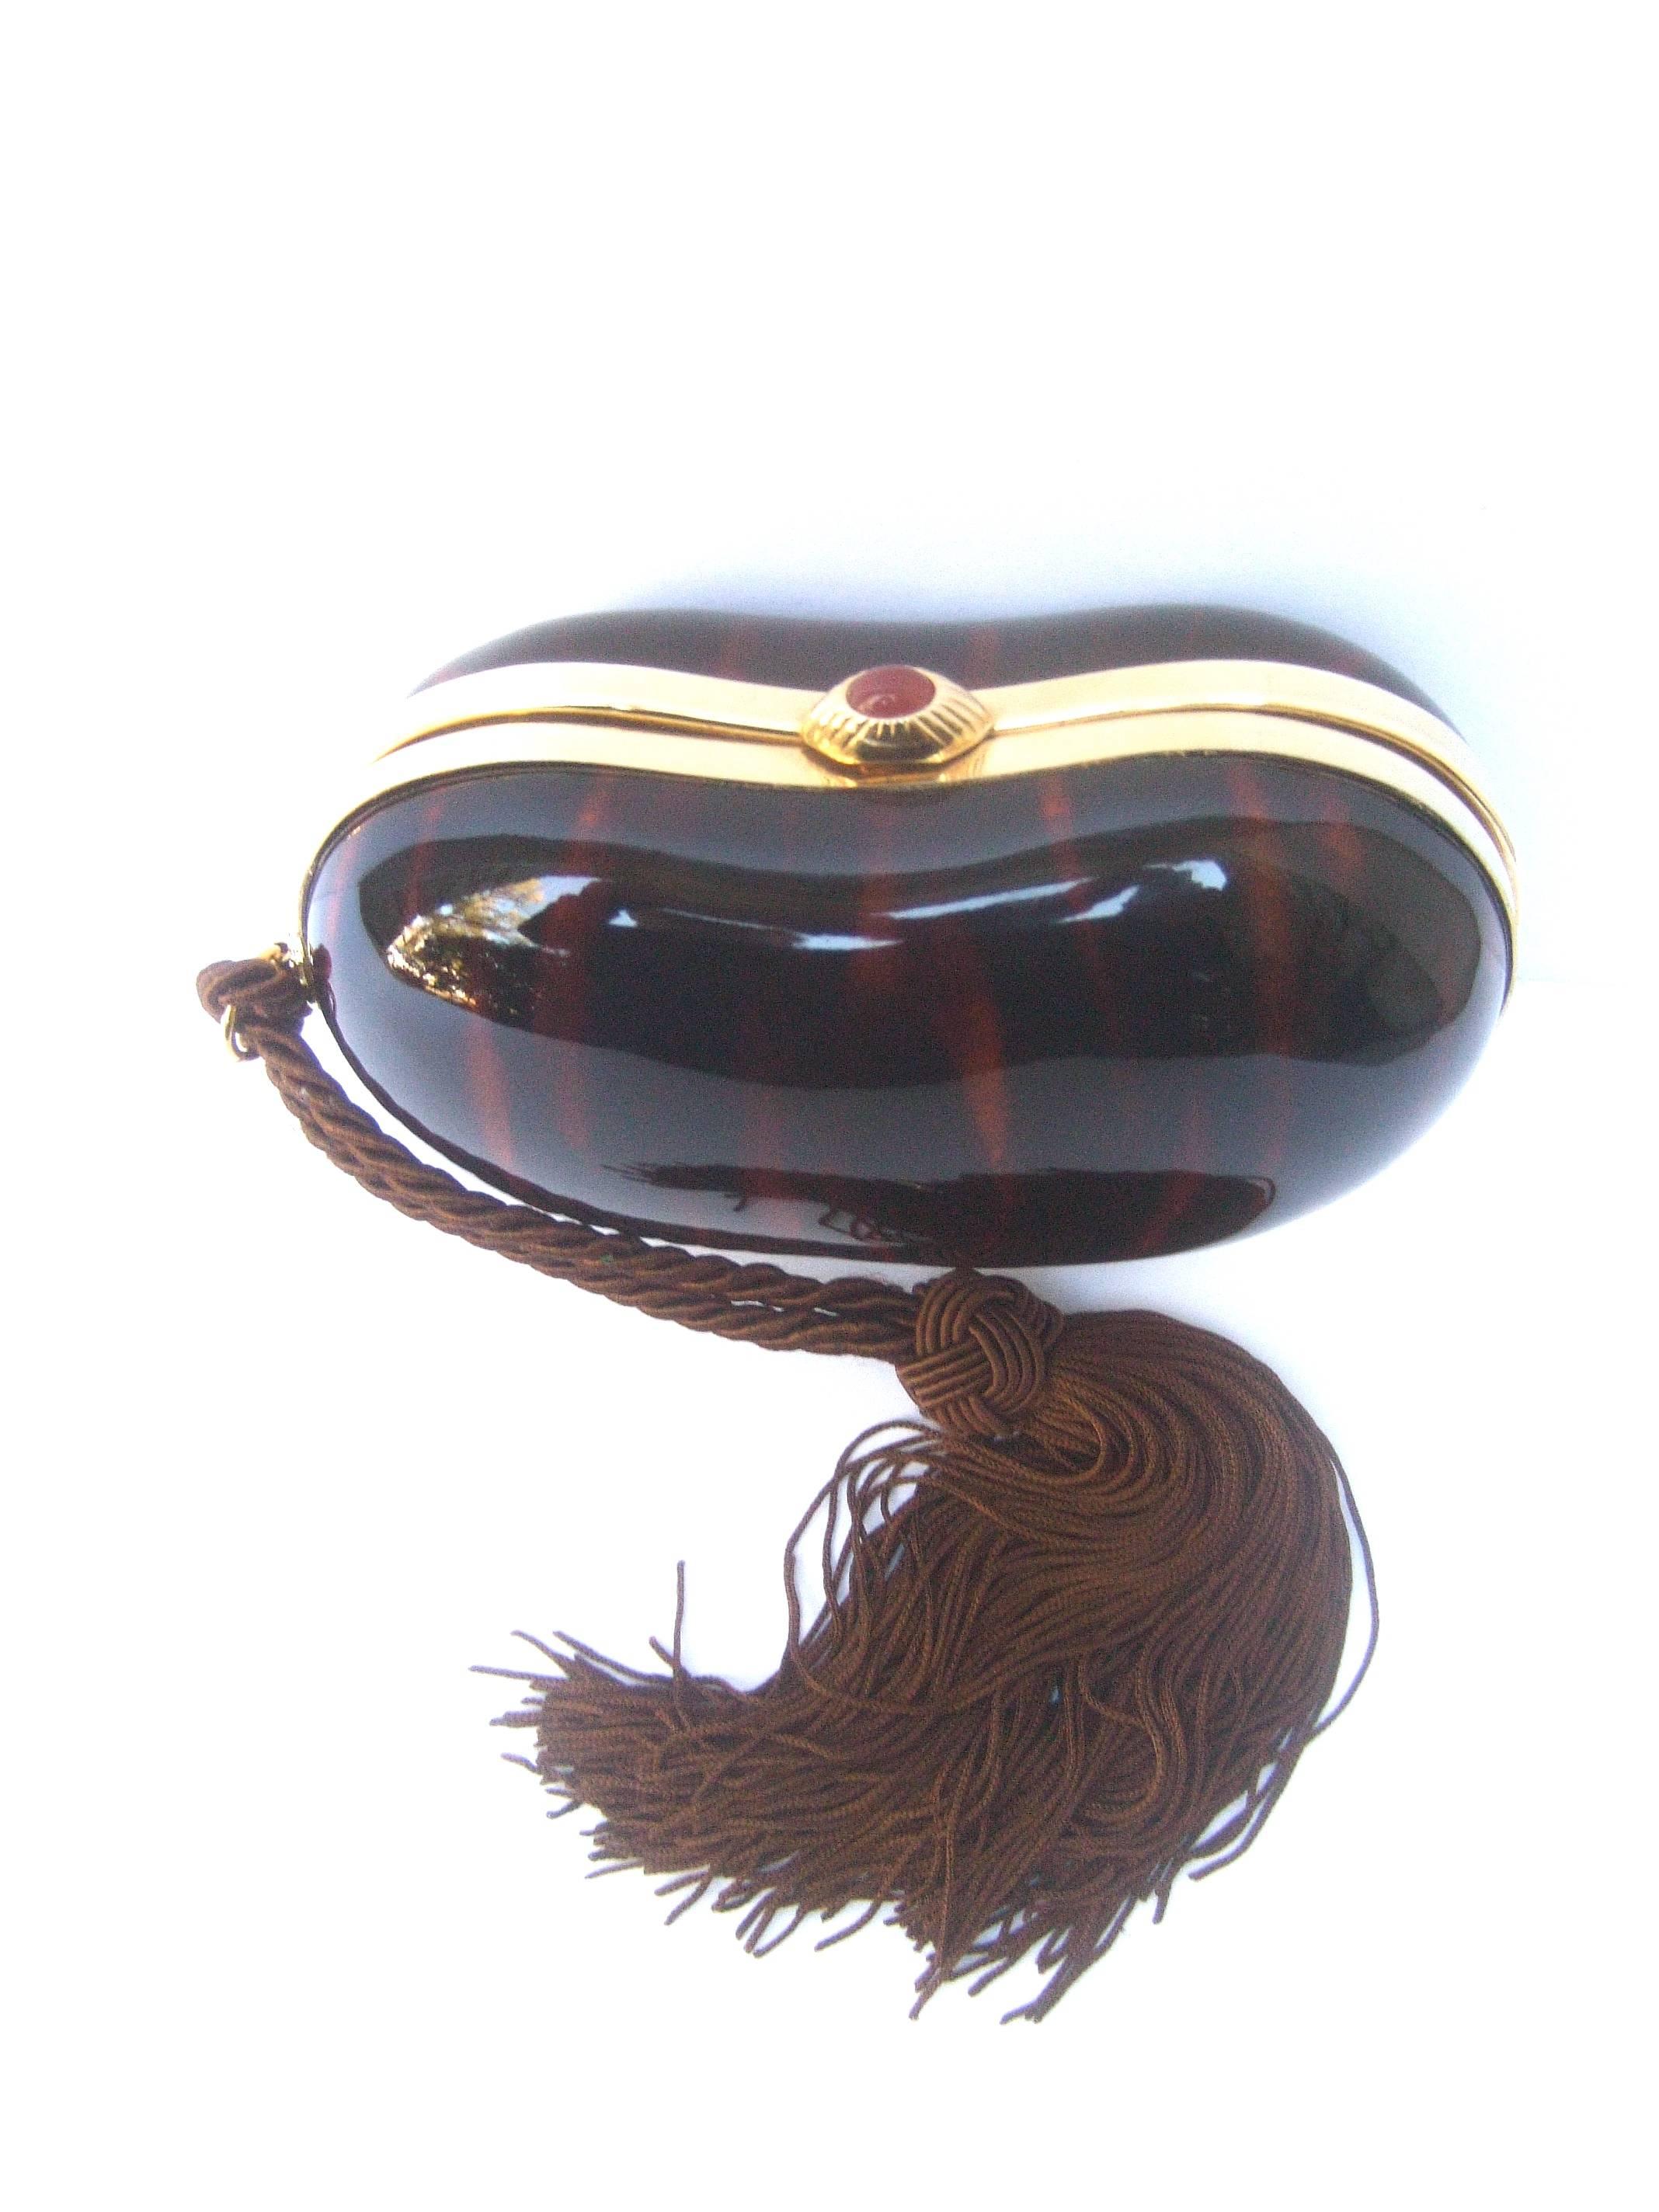 Saks Fifth Avenue Italian tortoise shell lucite tassel evening bag c 1970s
The elegant kidney shaped lucite clutch bag us framed with sleek
gilt metal trim that circles the opening 

Dangling from one side is a braided brown fringe tassel. The gilt